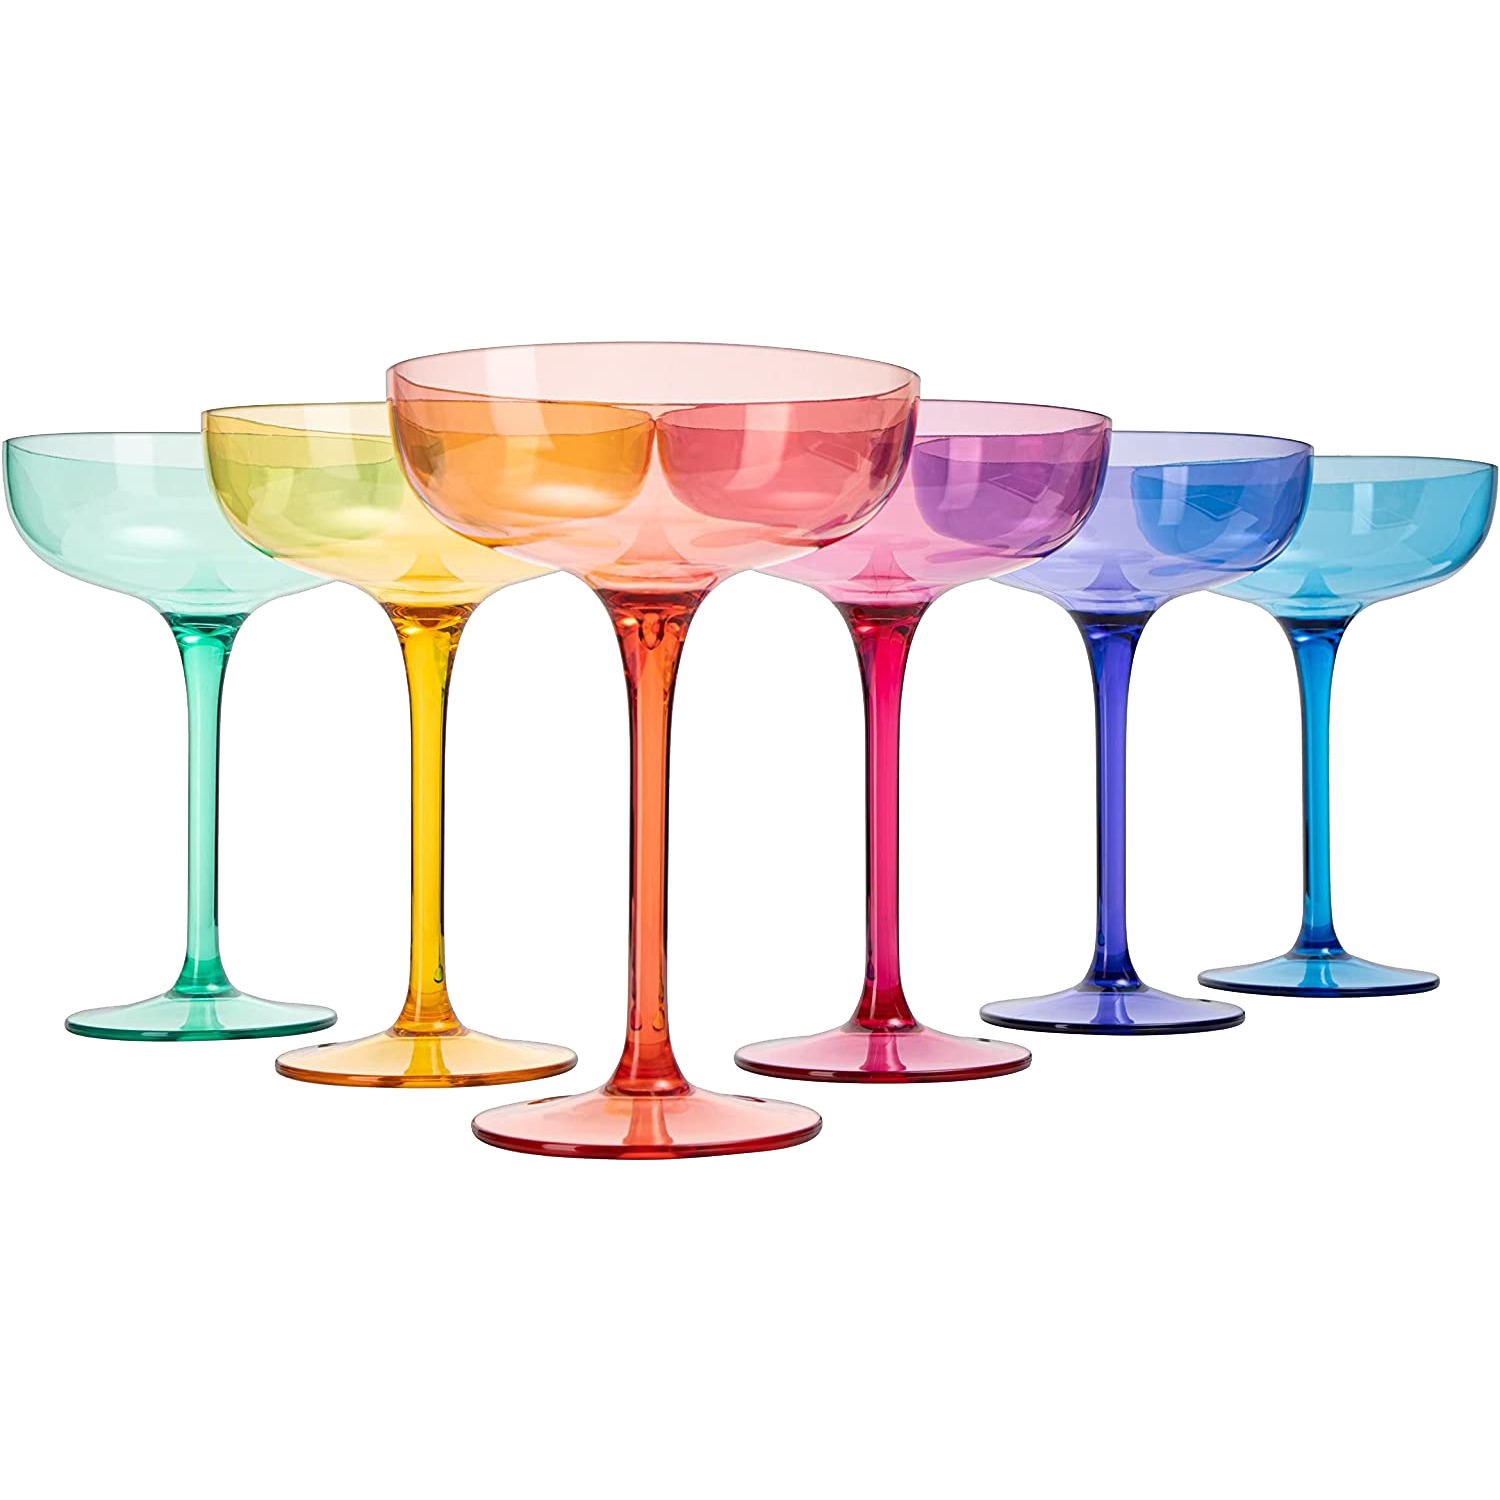 Unbreakable Plastic Drinking Glasses [Set of 6] Shatterproof Drinking Cups 16  Oz